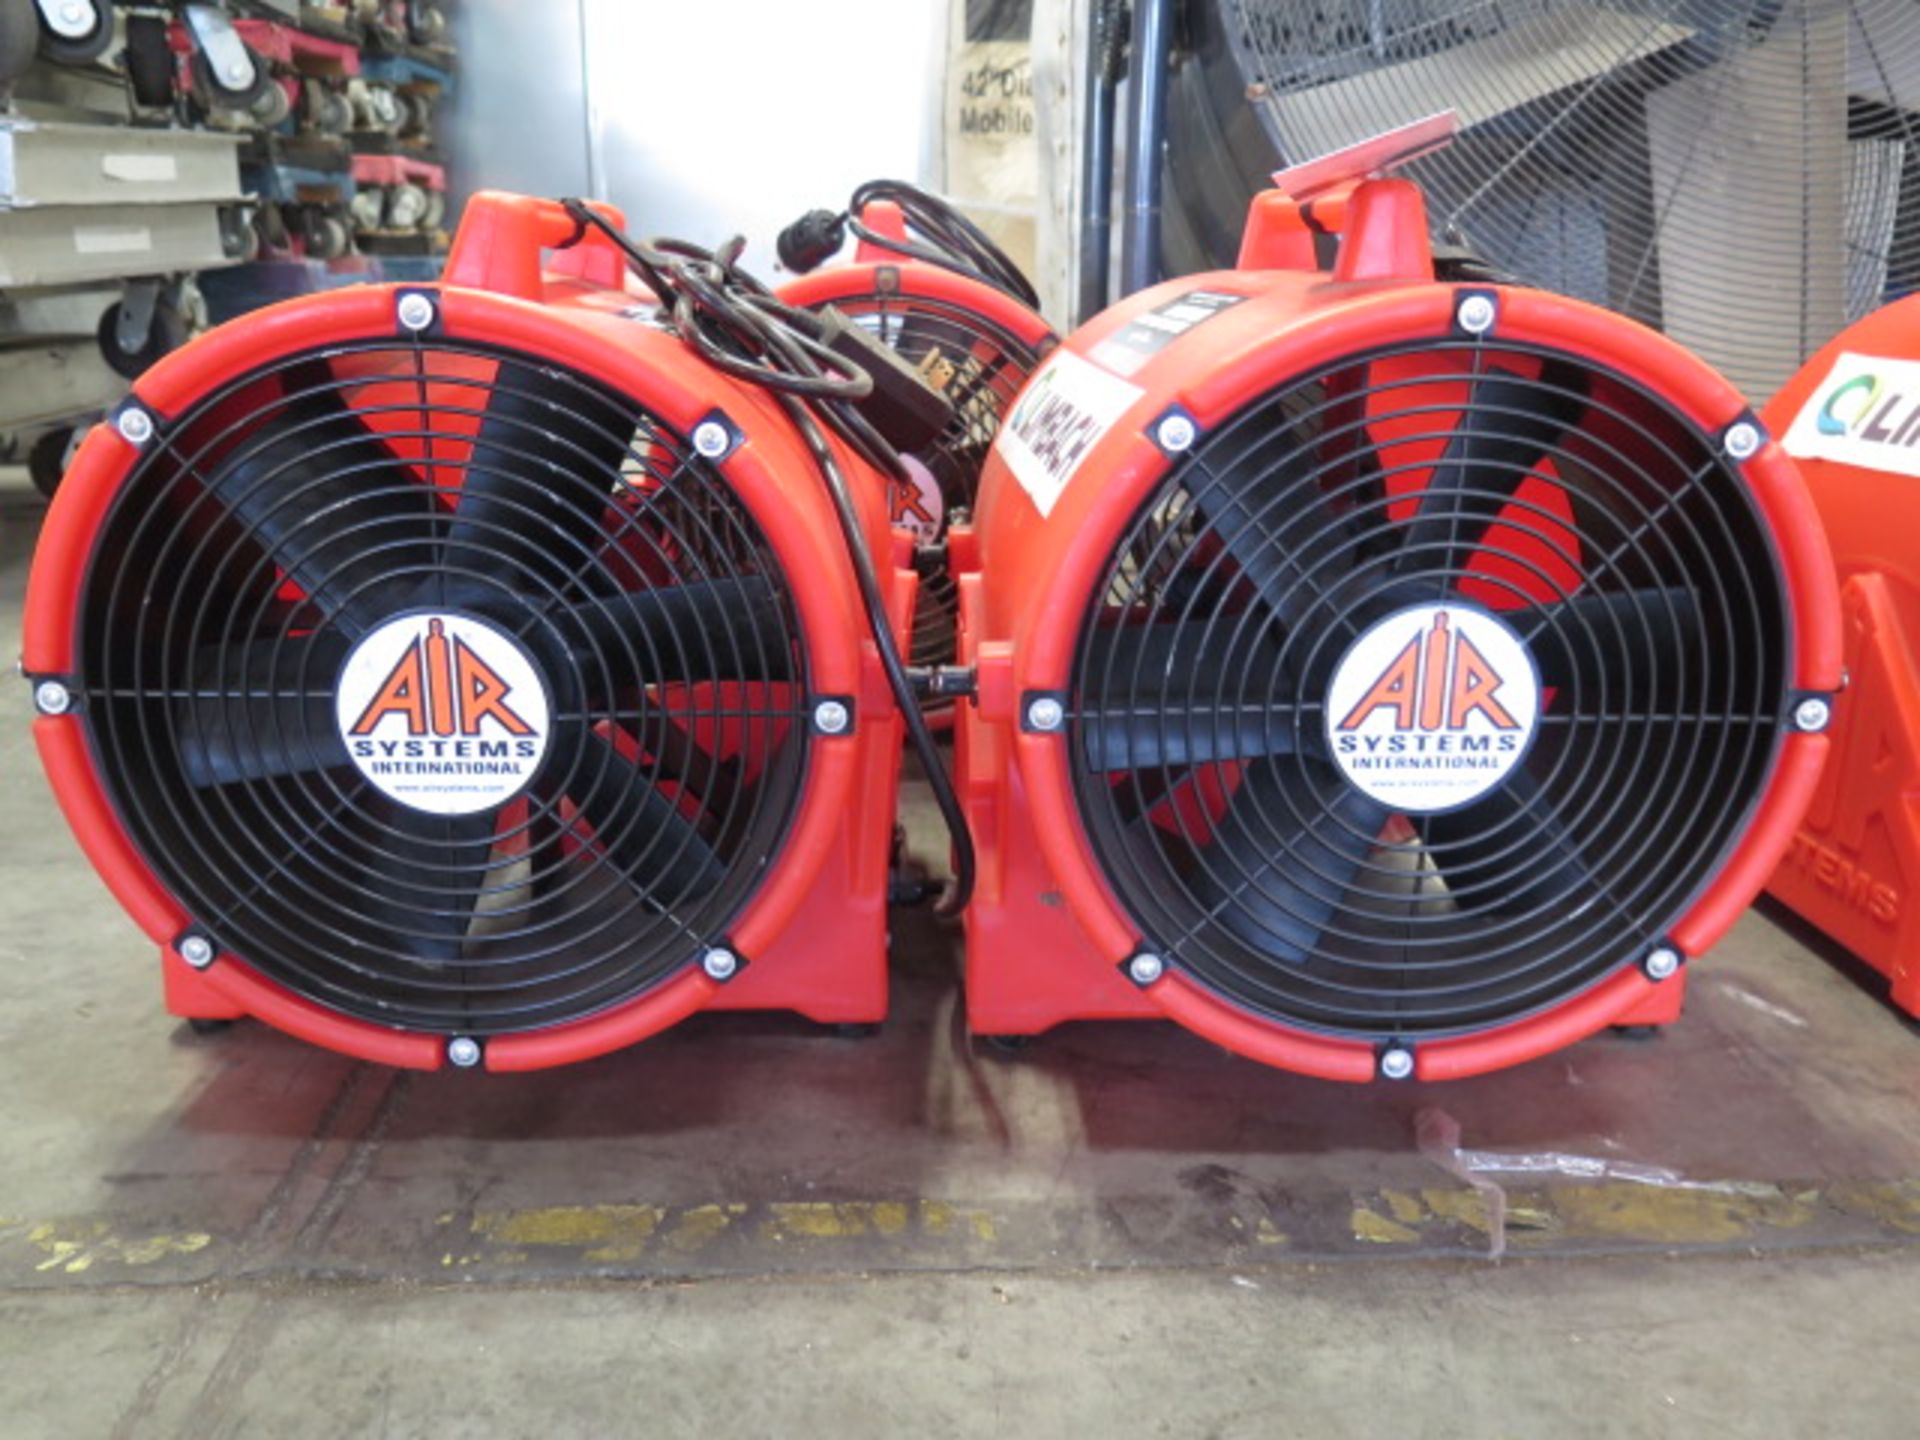 Air Systems CVF-12AC Blower Fans (3) (SOLD AS-IS - NO WARRANTY) - Image 2 of 4